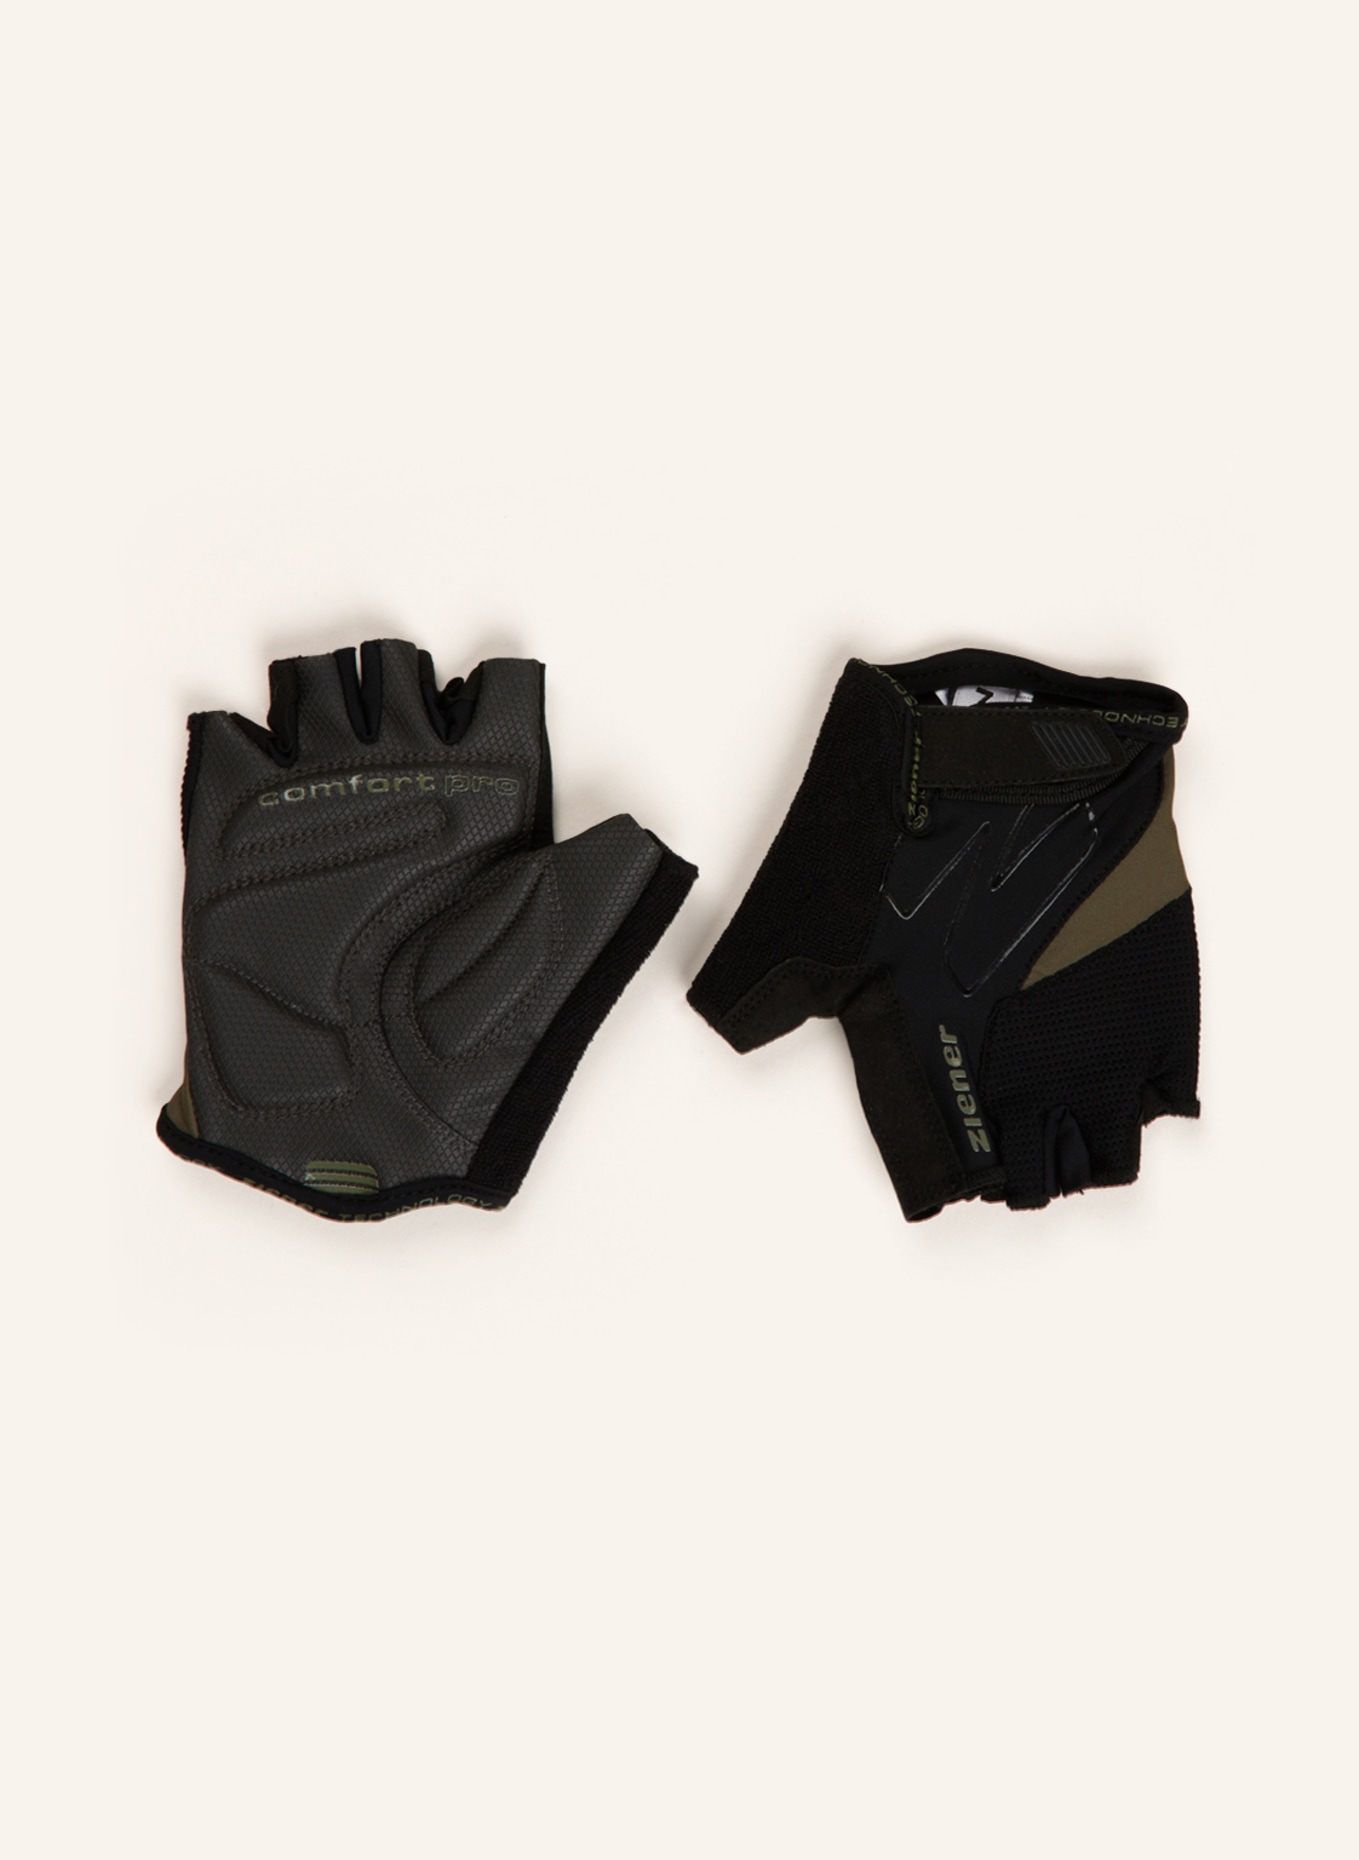 ziener black/ in khaki CRAVE gloves Cycling